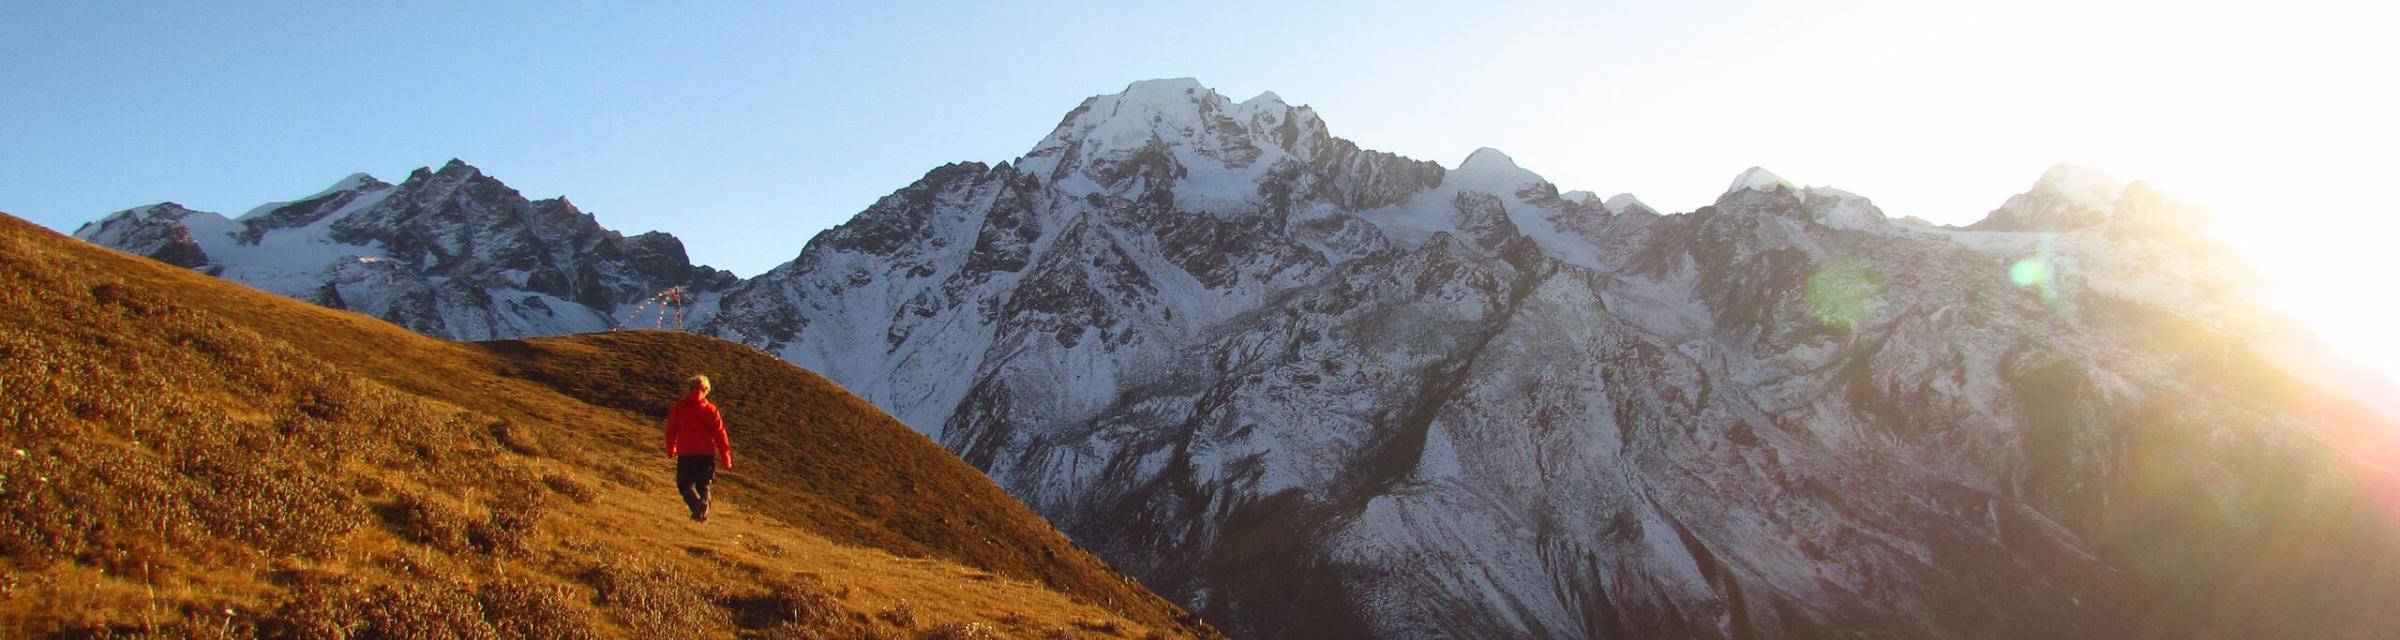 The Himalayas are a mountain range that span across Asia, separating the Indian subcontinent from the Tibetan Plateau.